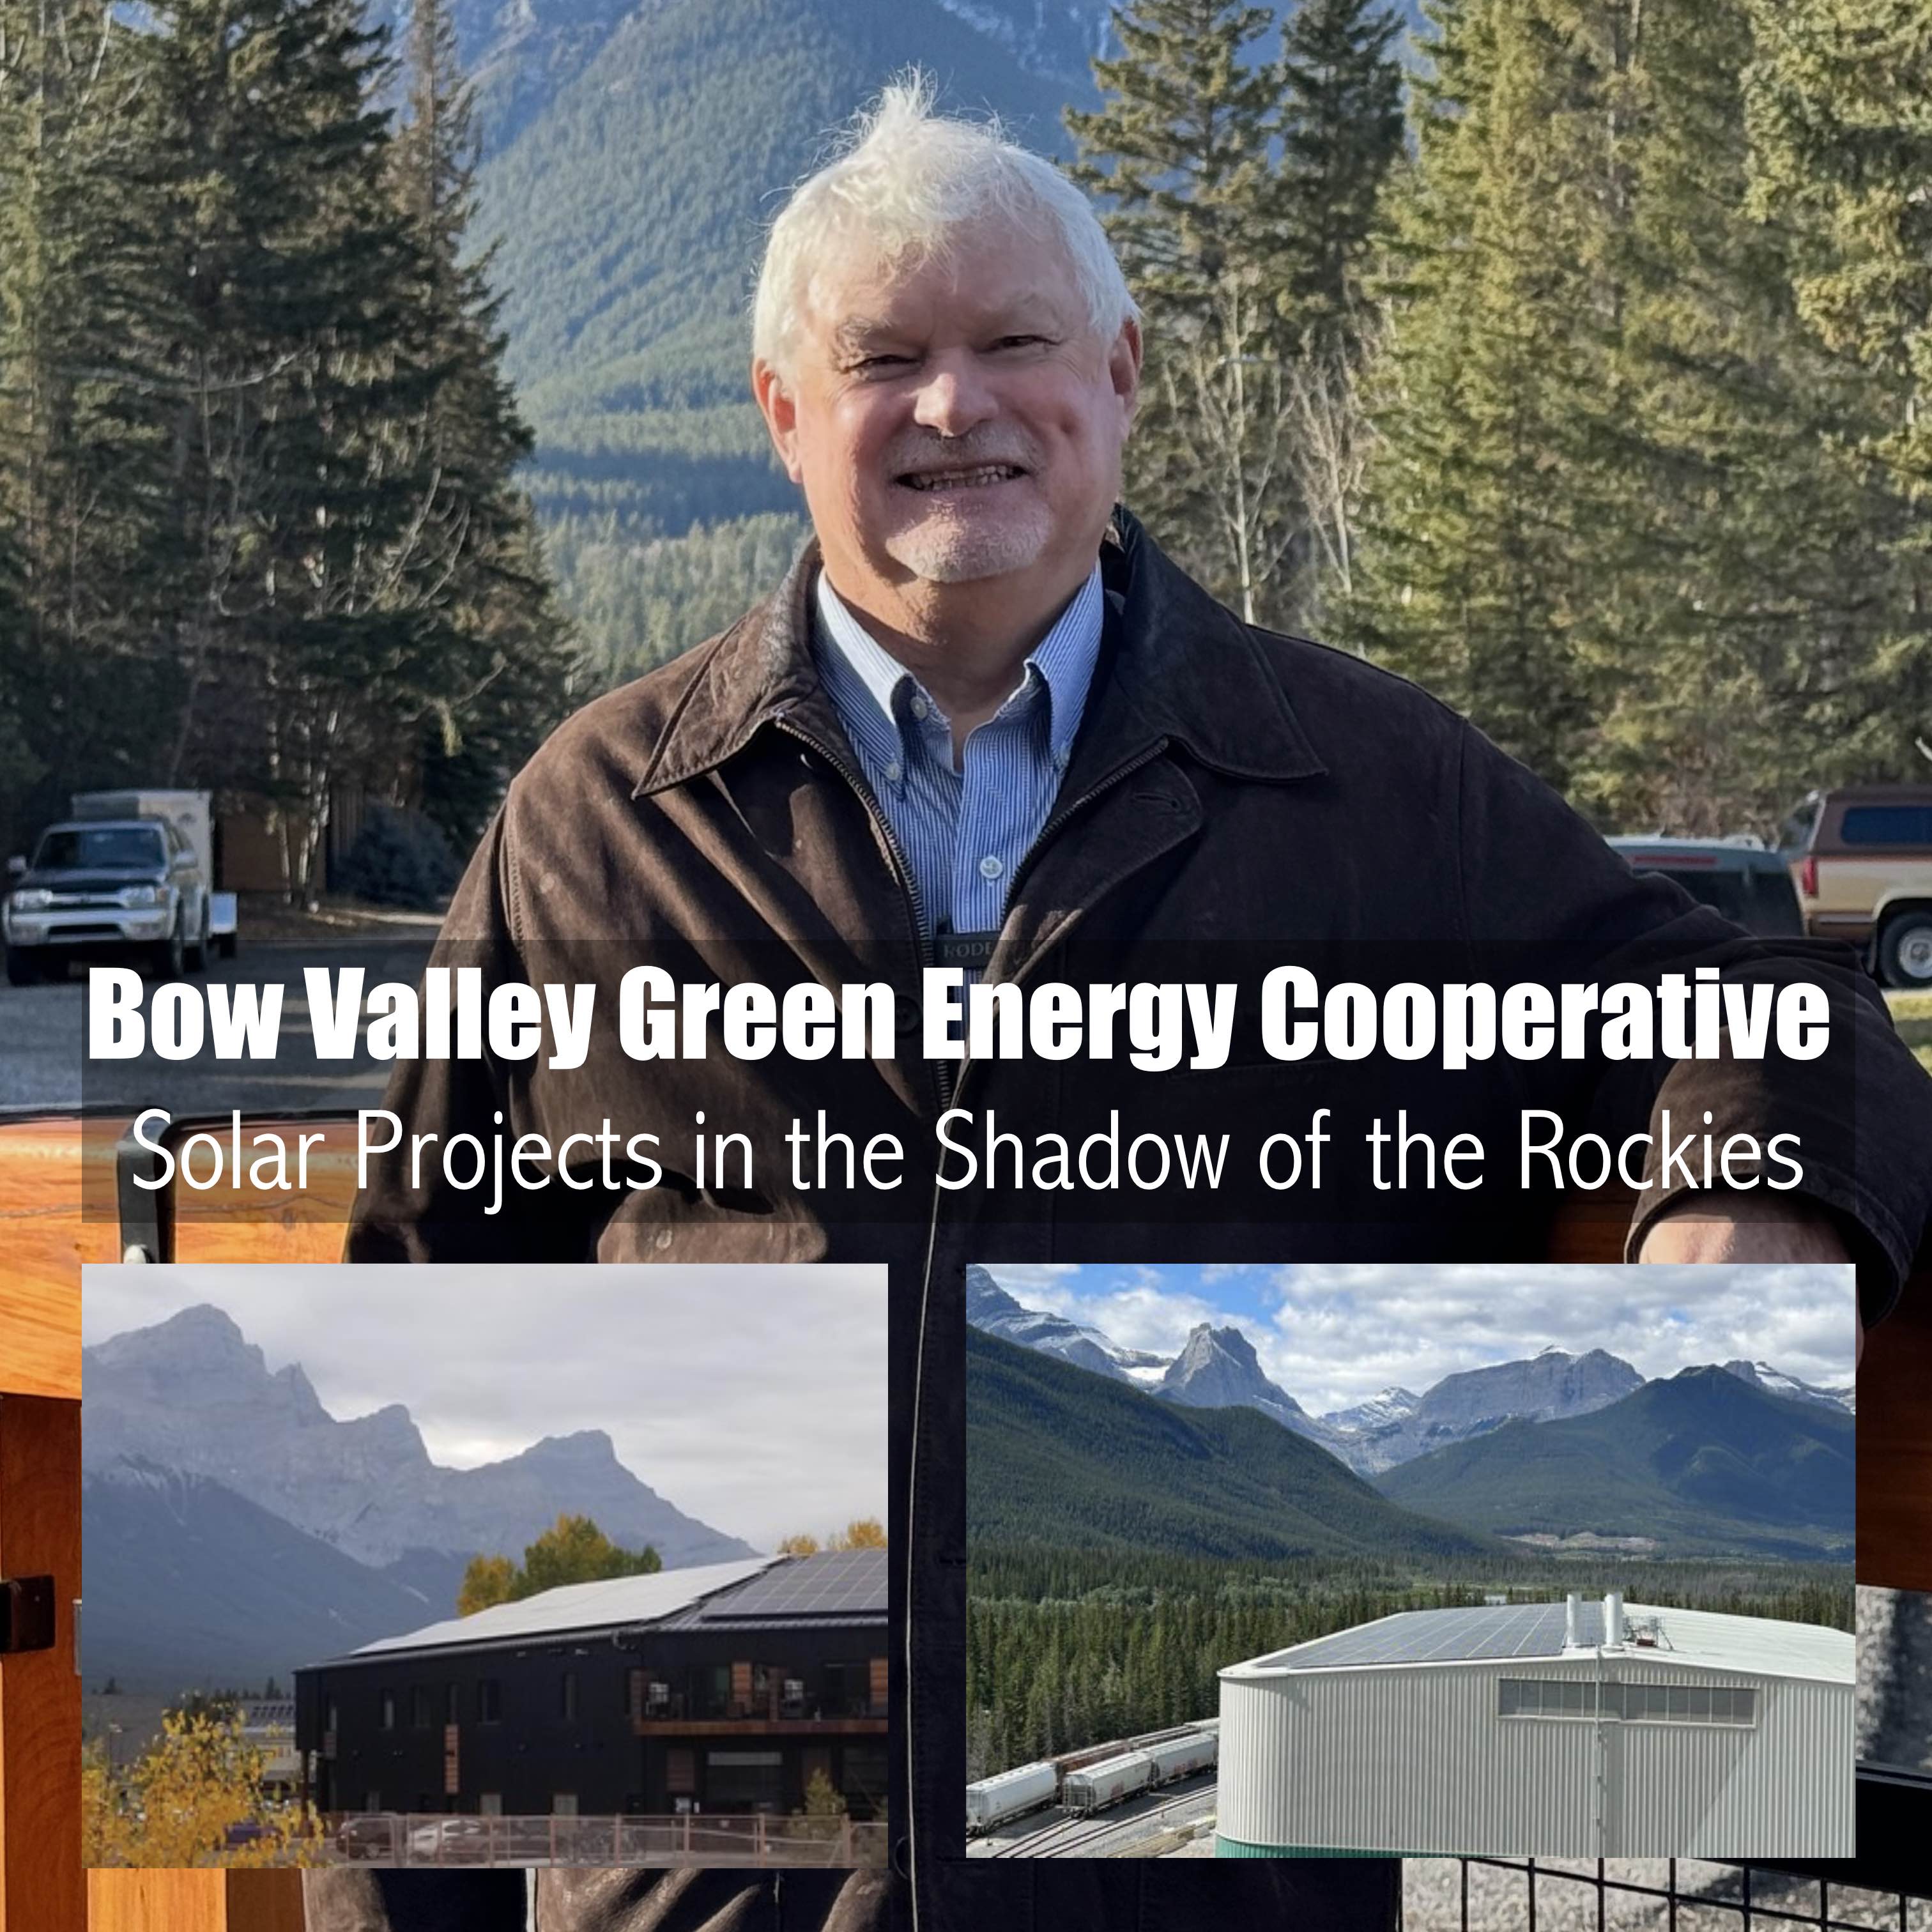 Bow Valley Green Energy Cooperative